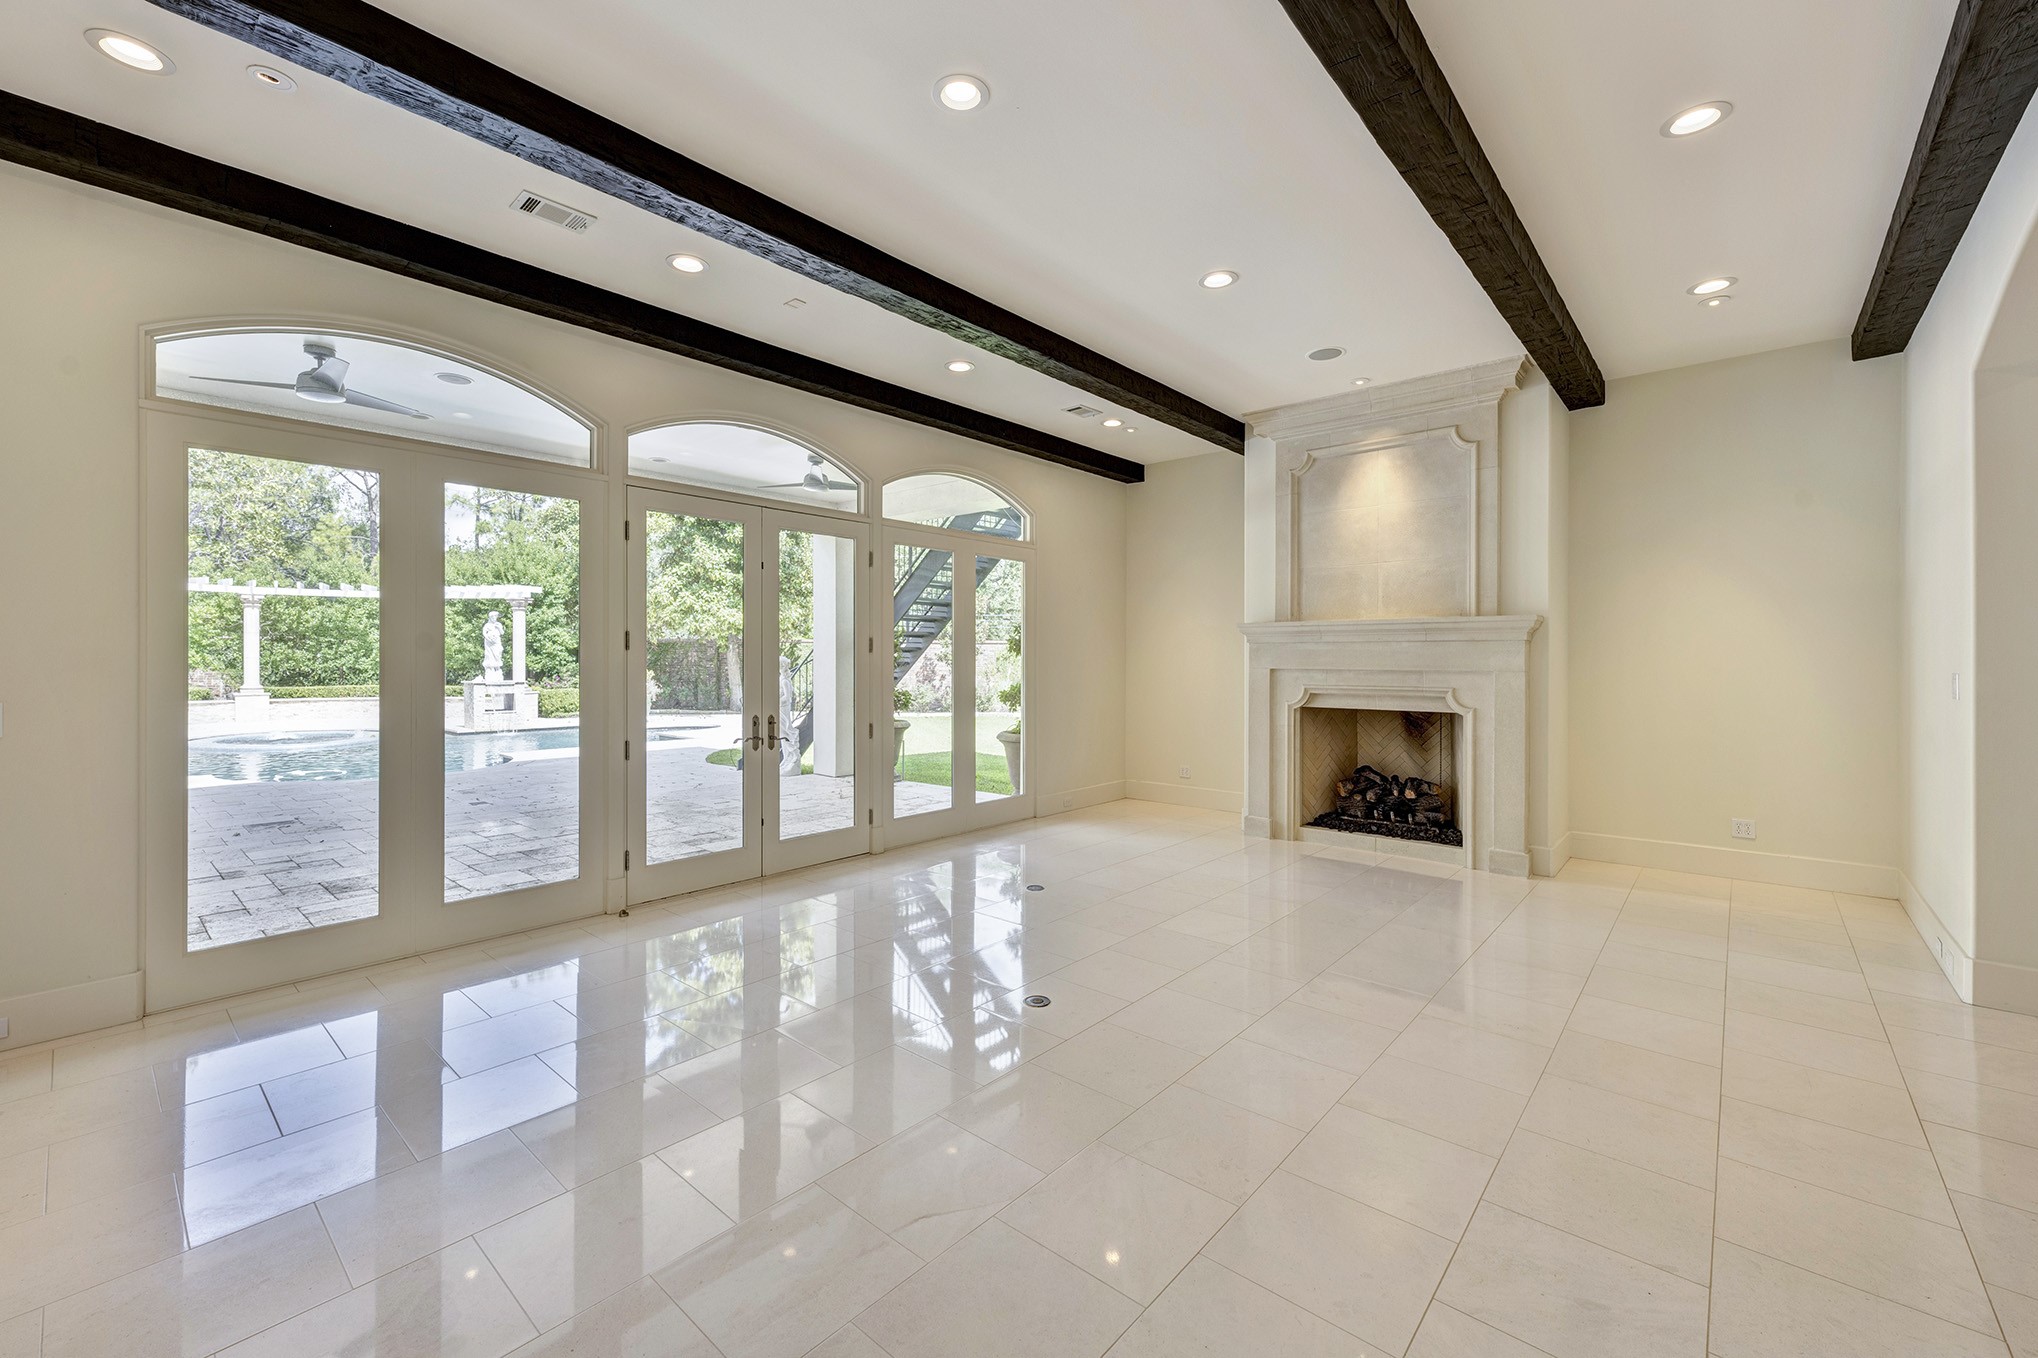 Formal living with cast stone fireplace and french doors to loggia.